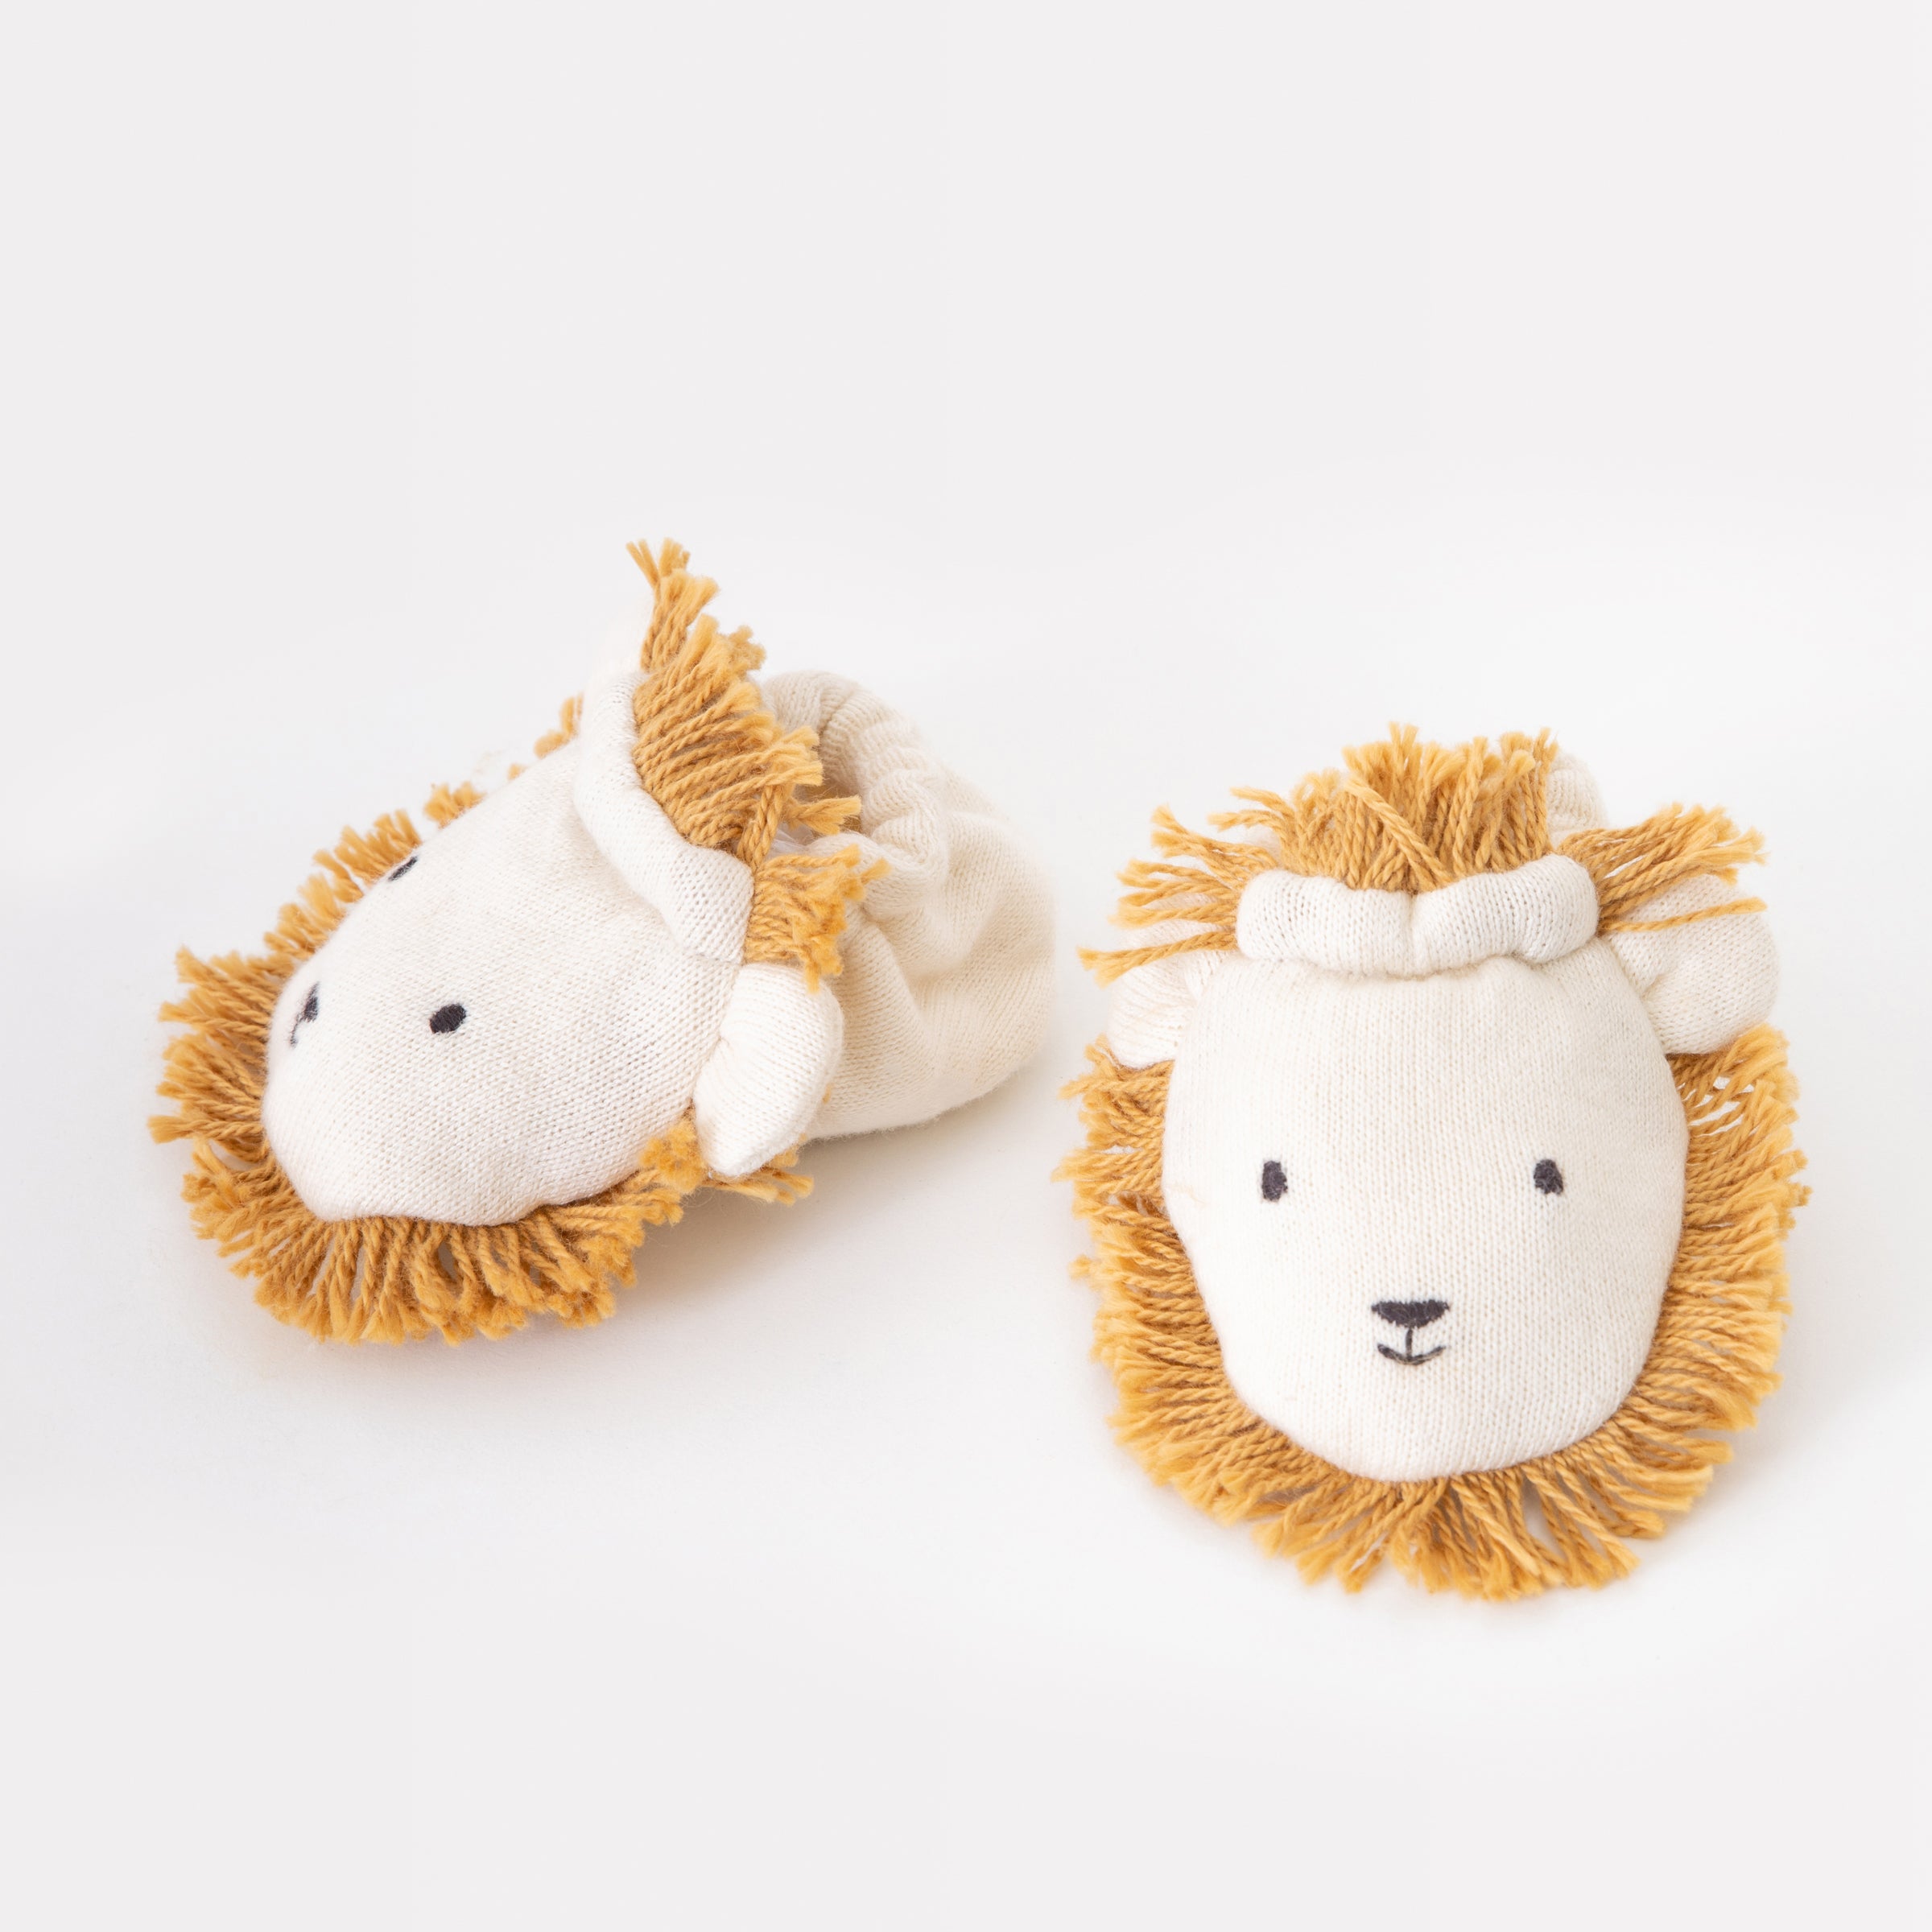 If you're looking for baby shower gift ideas then our lion baby booties, crafted from organic cotton, are perfect.